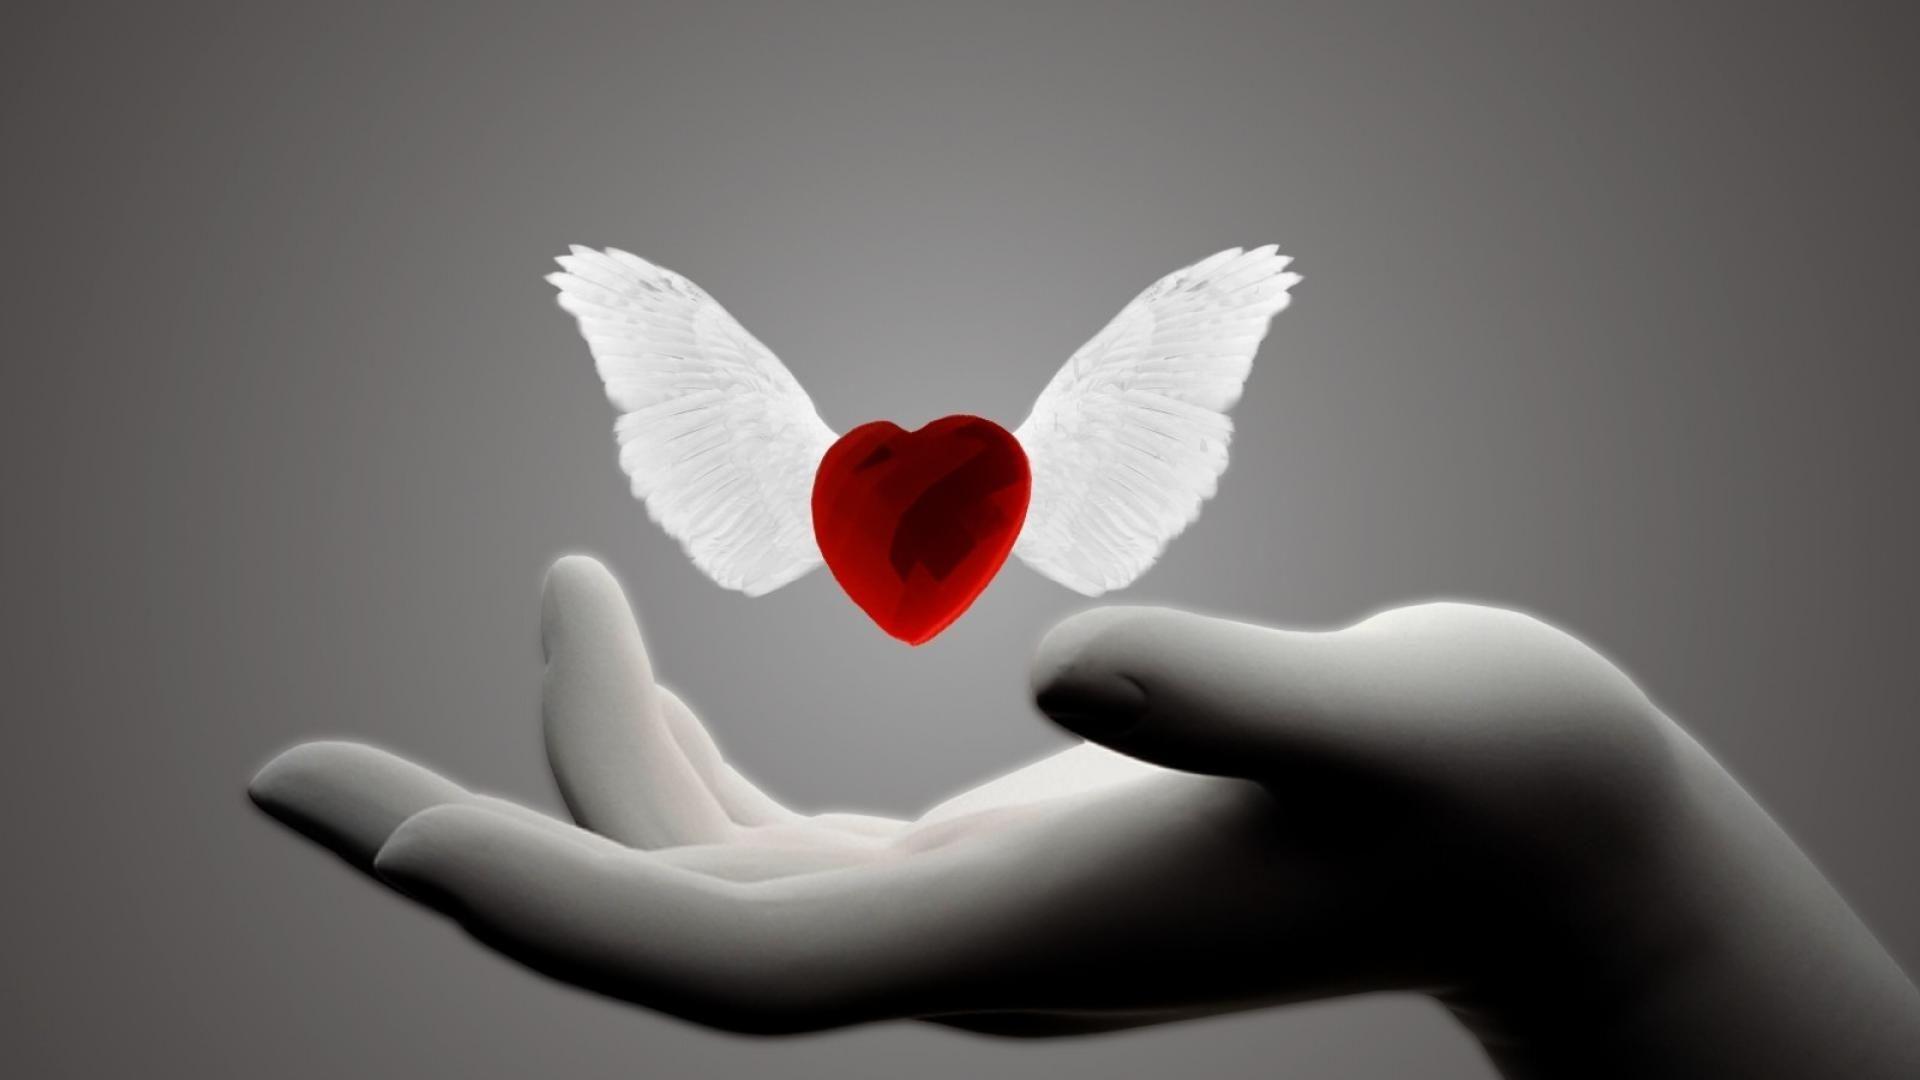 Loving Heart Backgrounds Wallpapers Hd - Heart With Wings In Hand - HD Wallpaper 